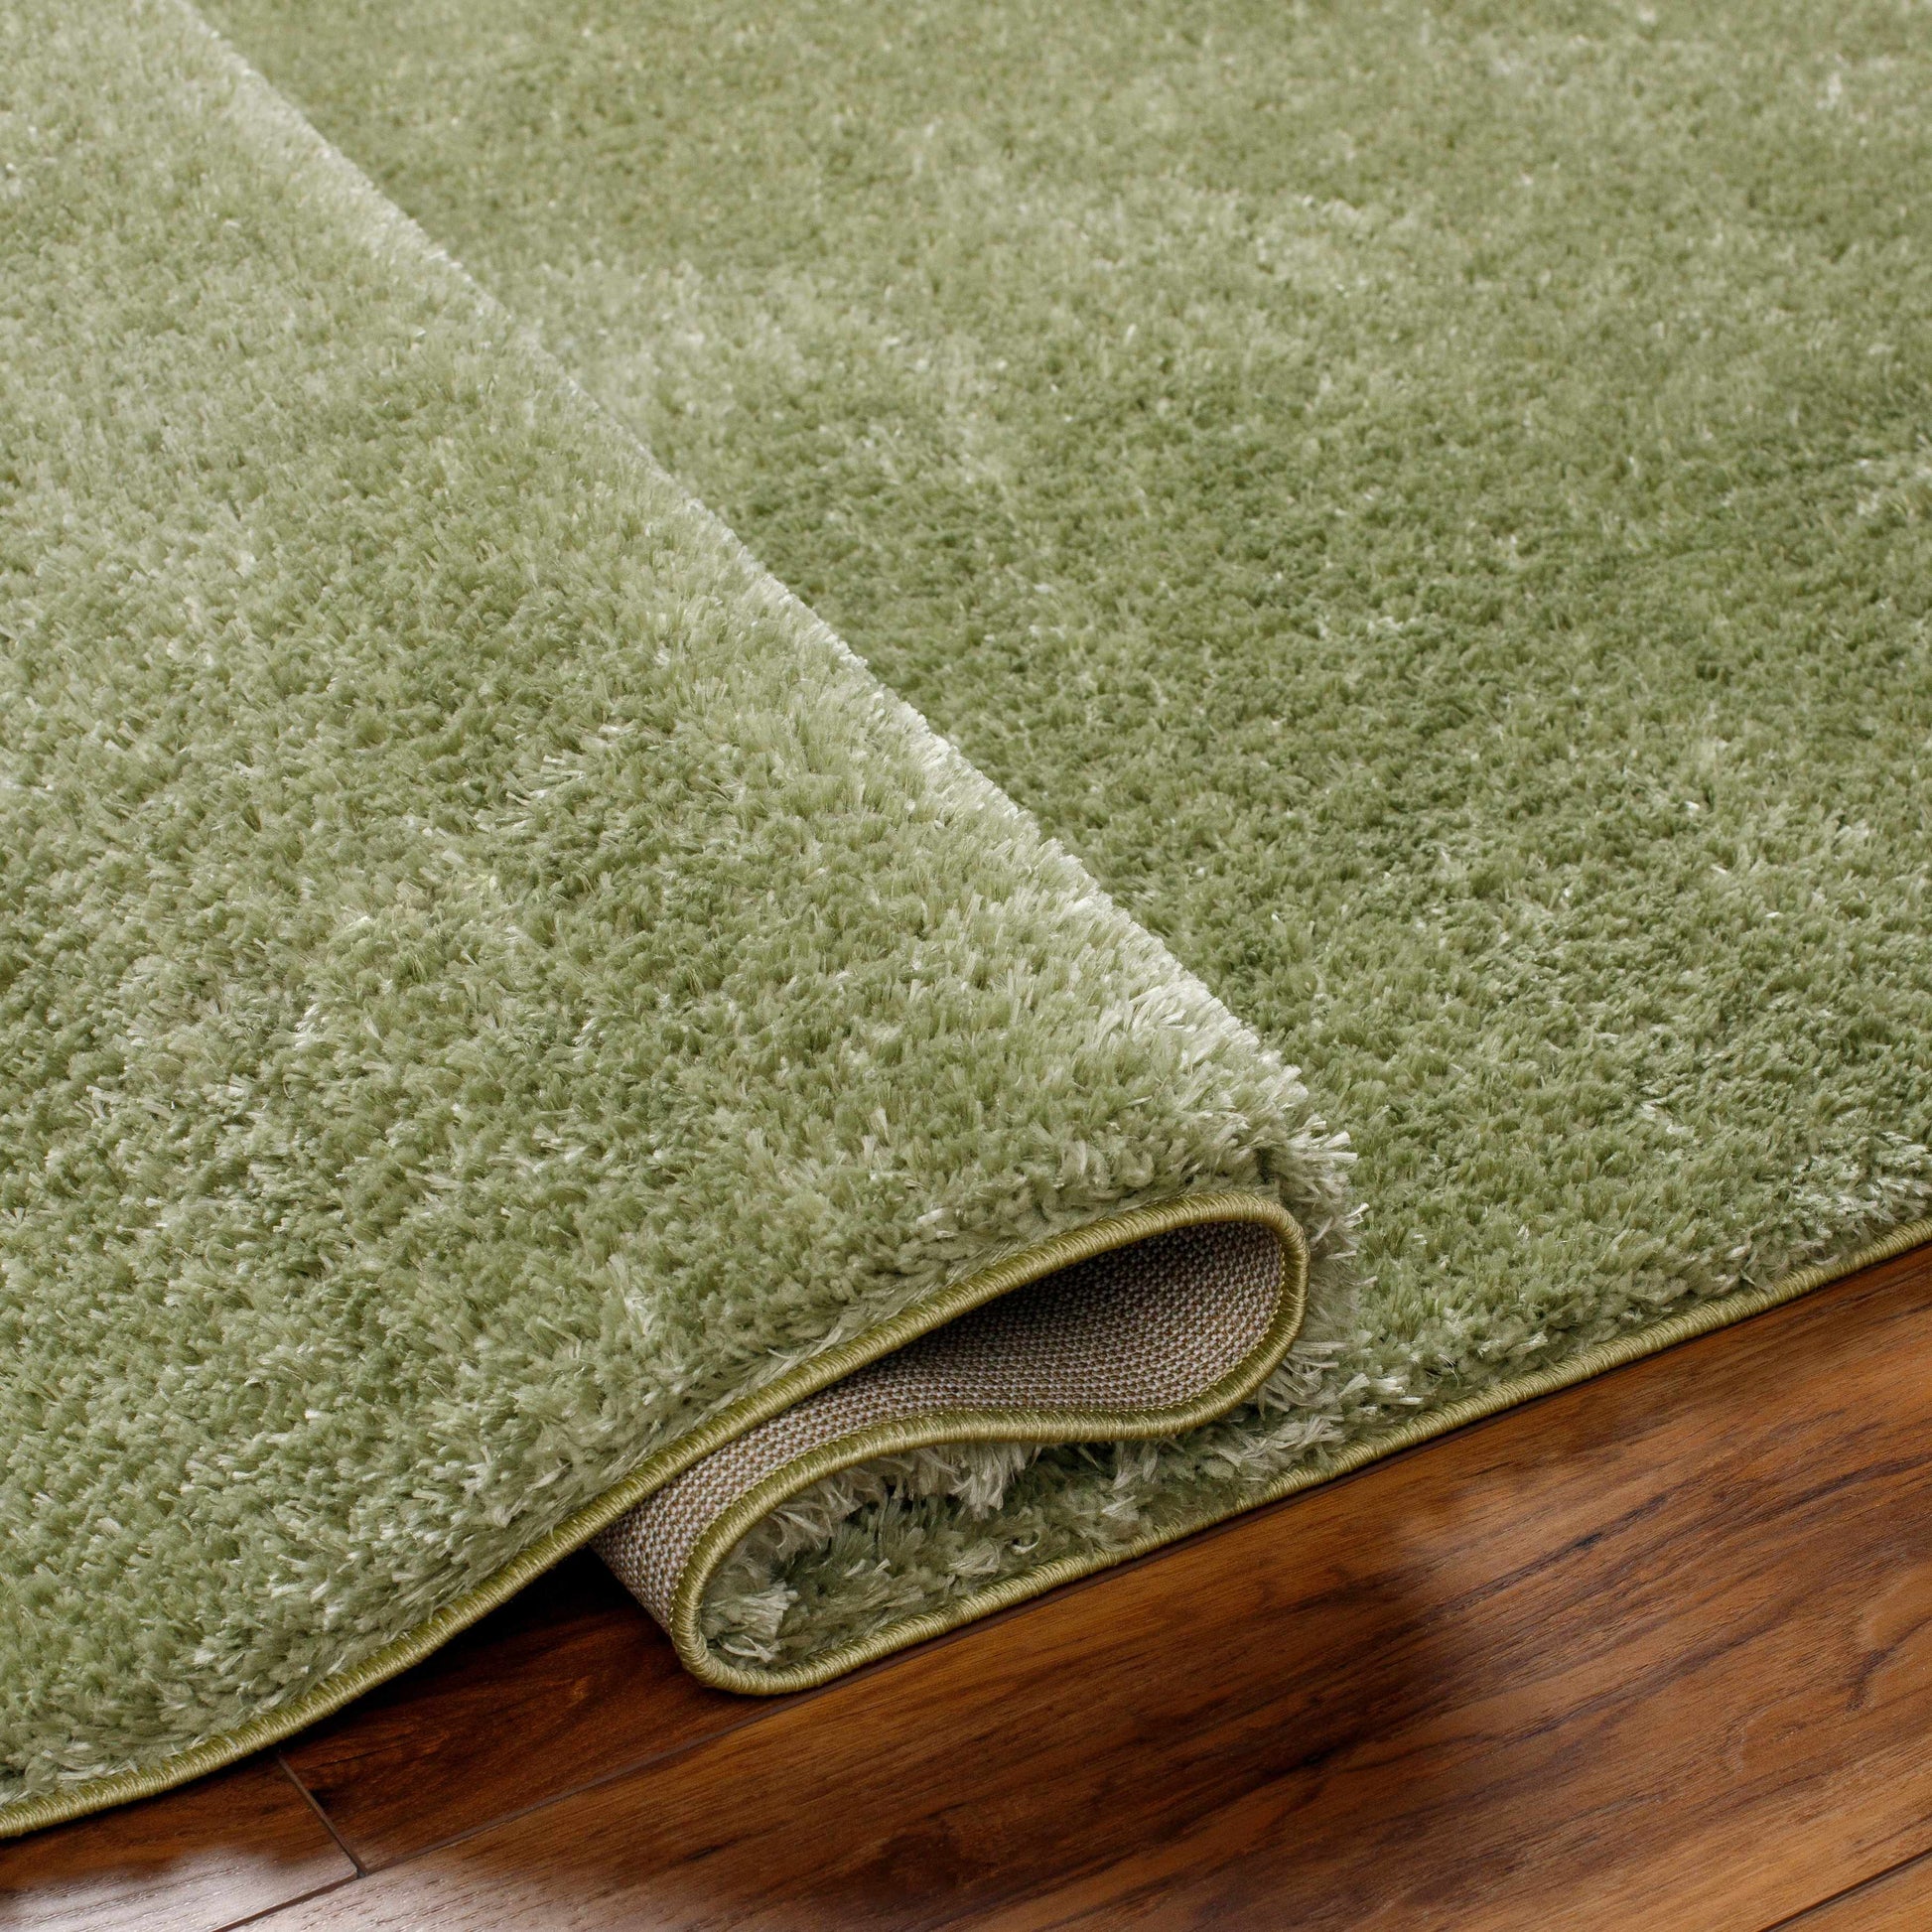 Boutique Rugs Rugs Heavenly Solid Green Plush Rug